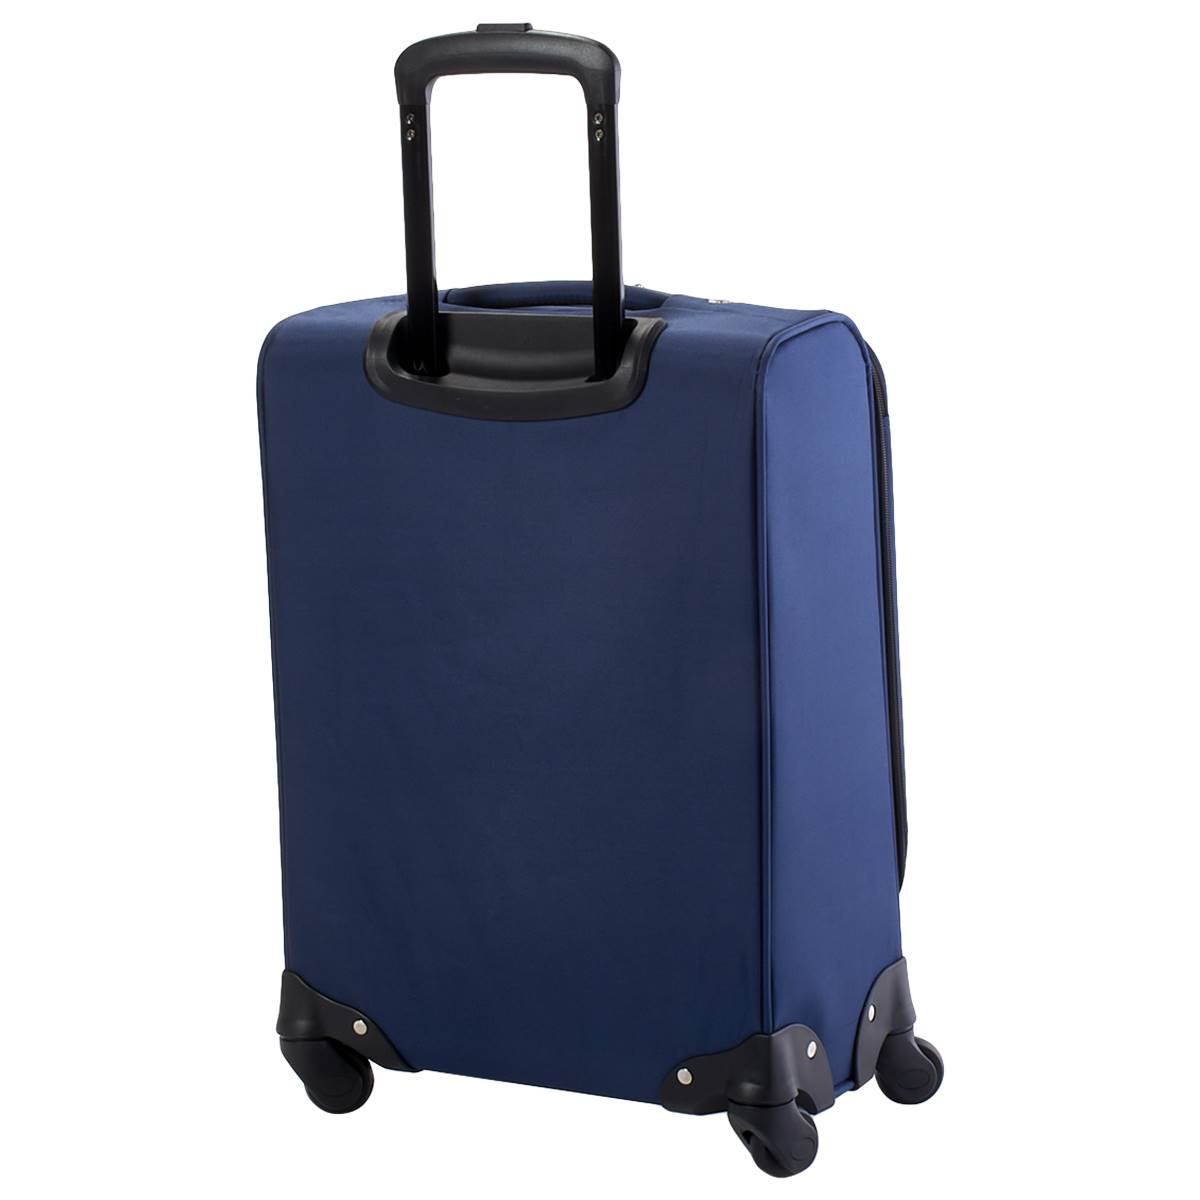 Nicole Miller New York  20in. Stripe Carry-On Luggage - Navy